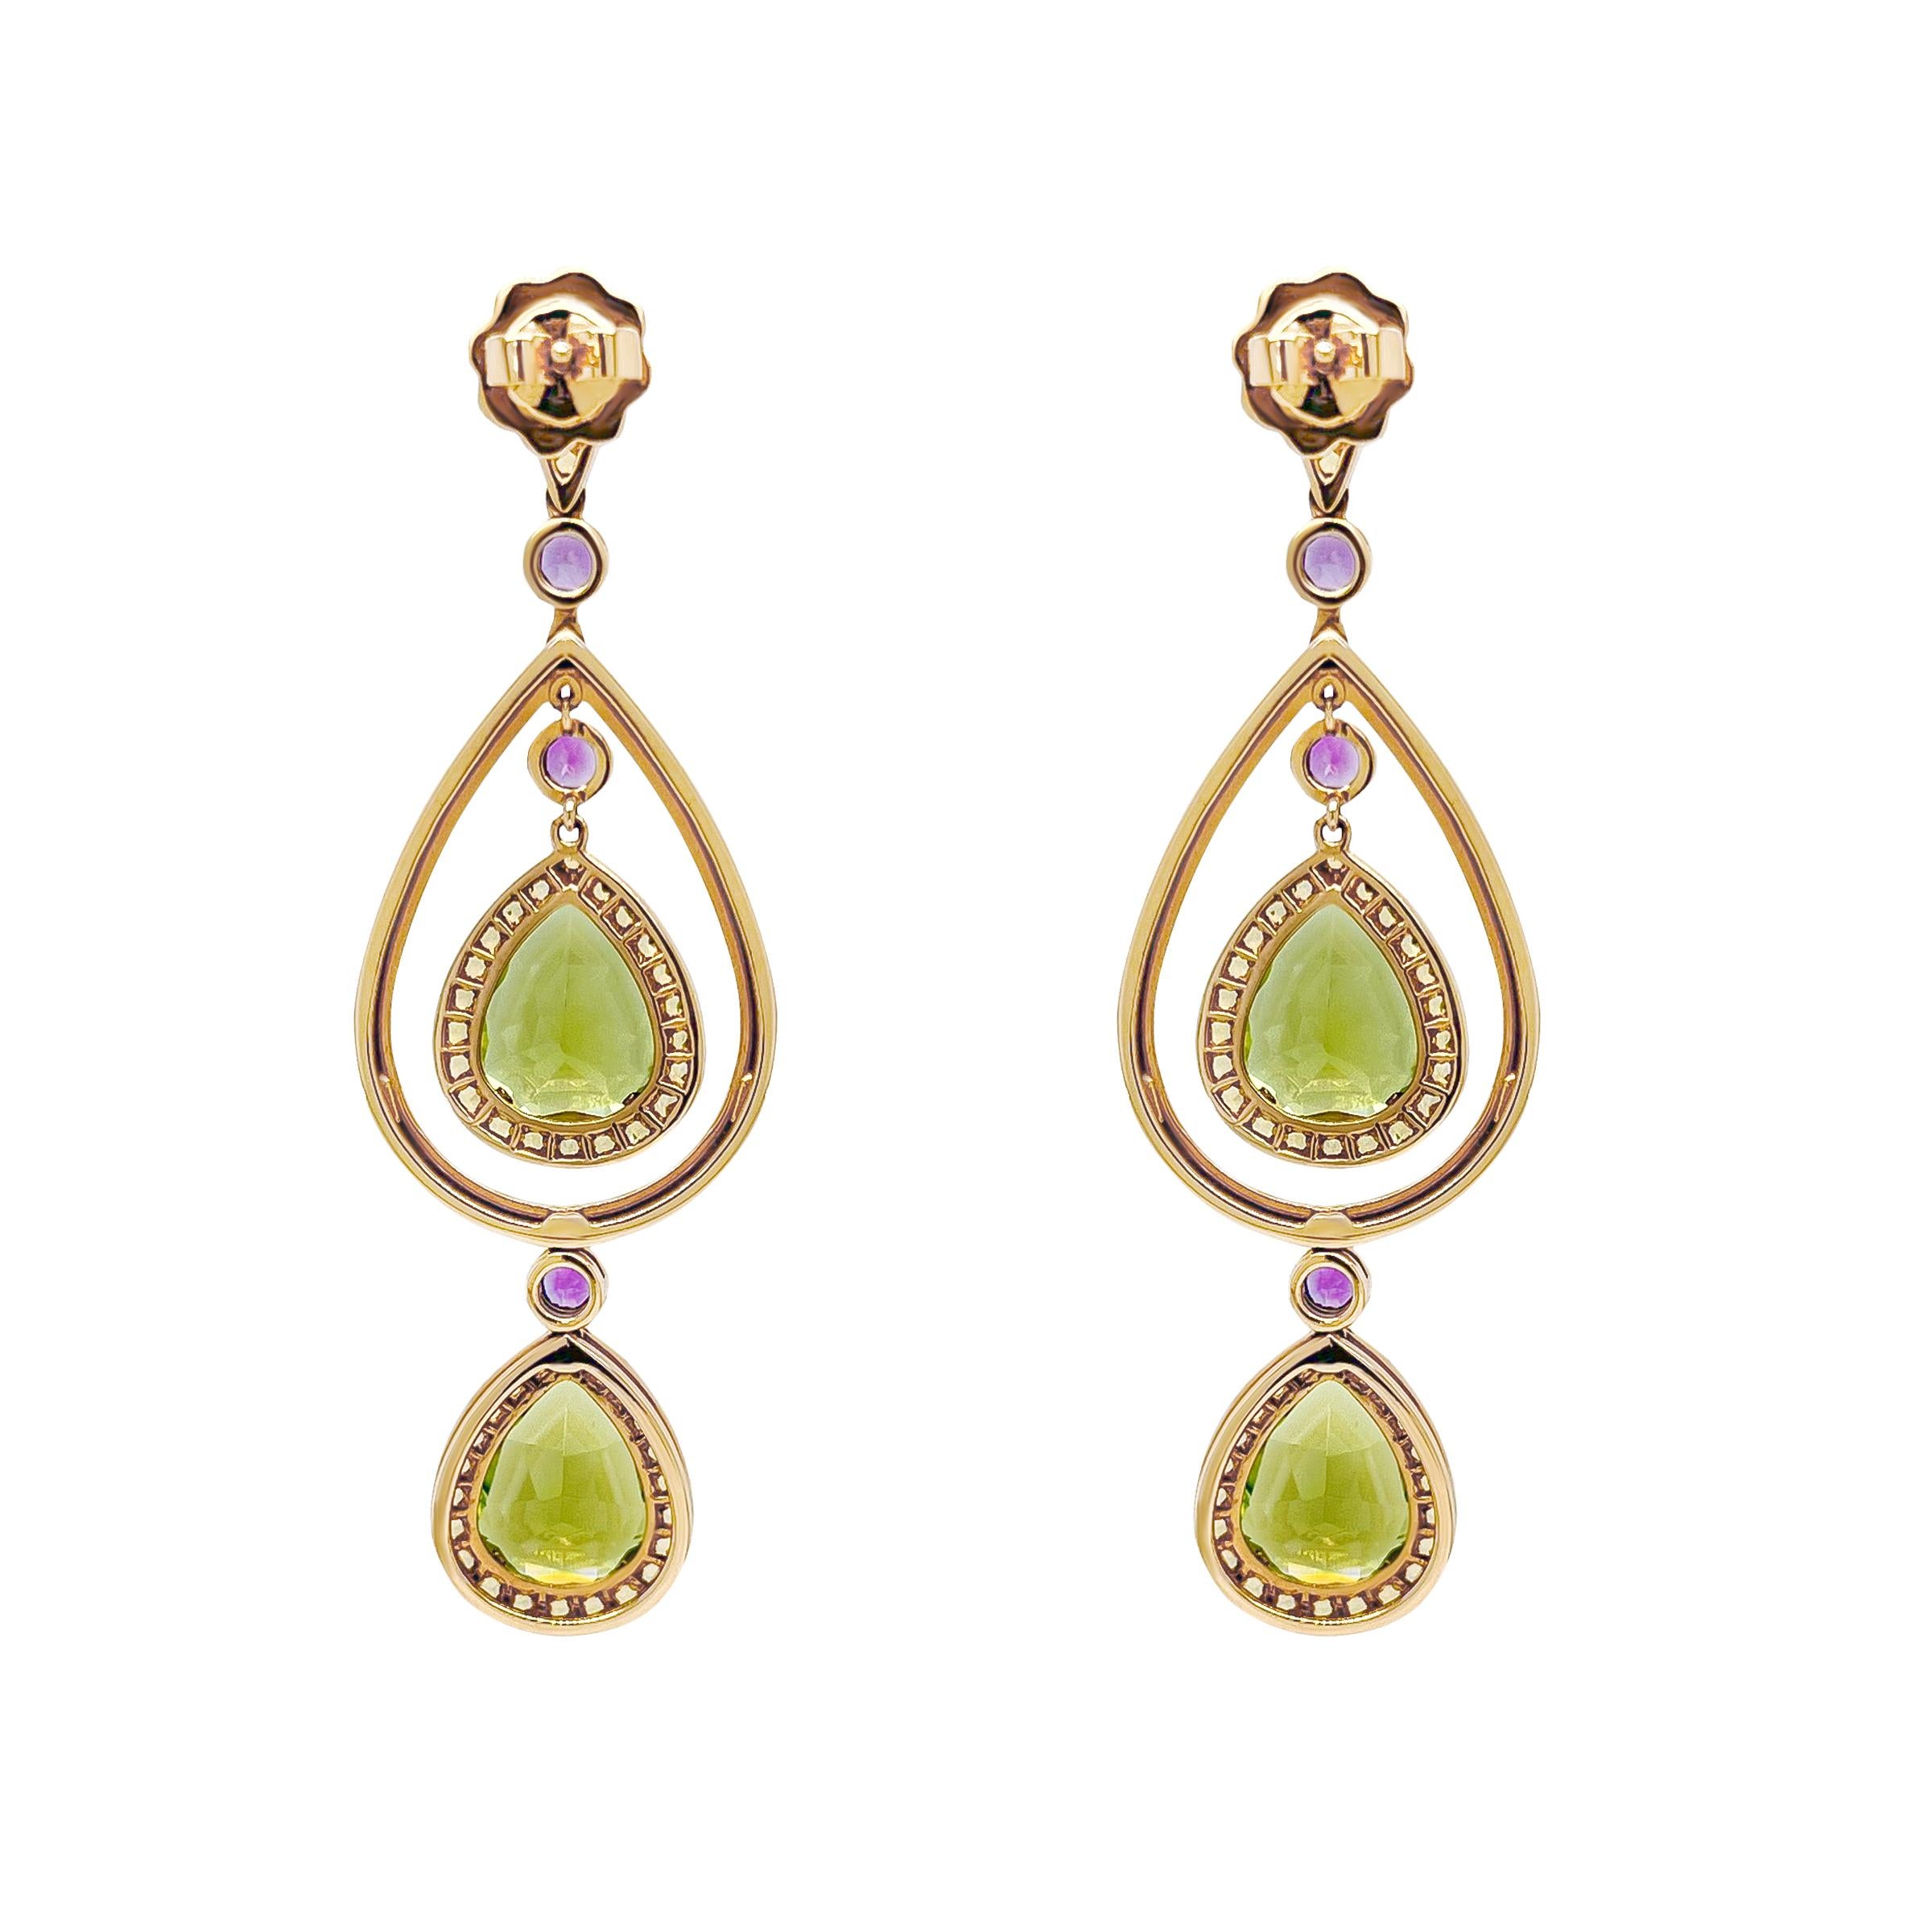 Finely cut and exquisite color peridot totalling 15.92 carats with exquiste colour is the centrepiece of these earrings. Created for movement, this pair of earrings are made in 18k yellow gold and are accented with natural pave yellow sapphire and